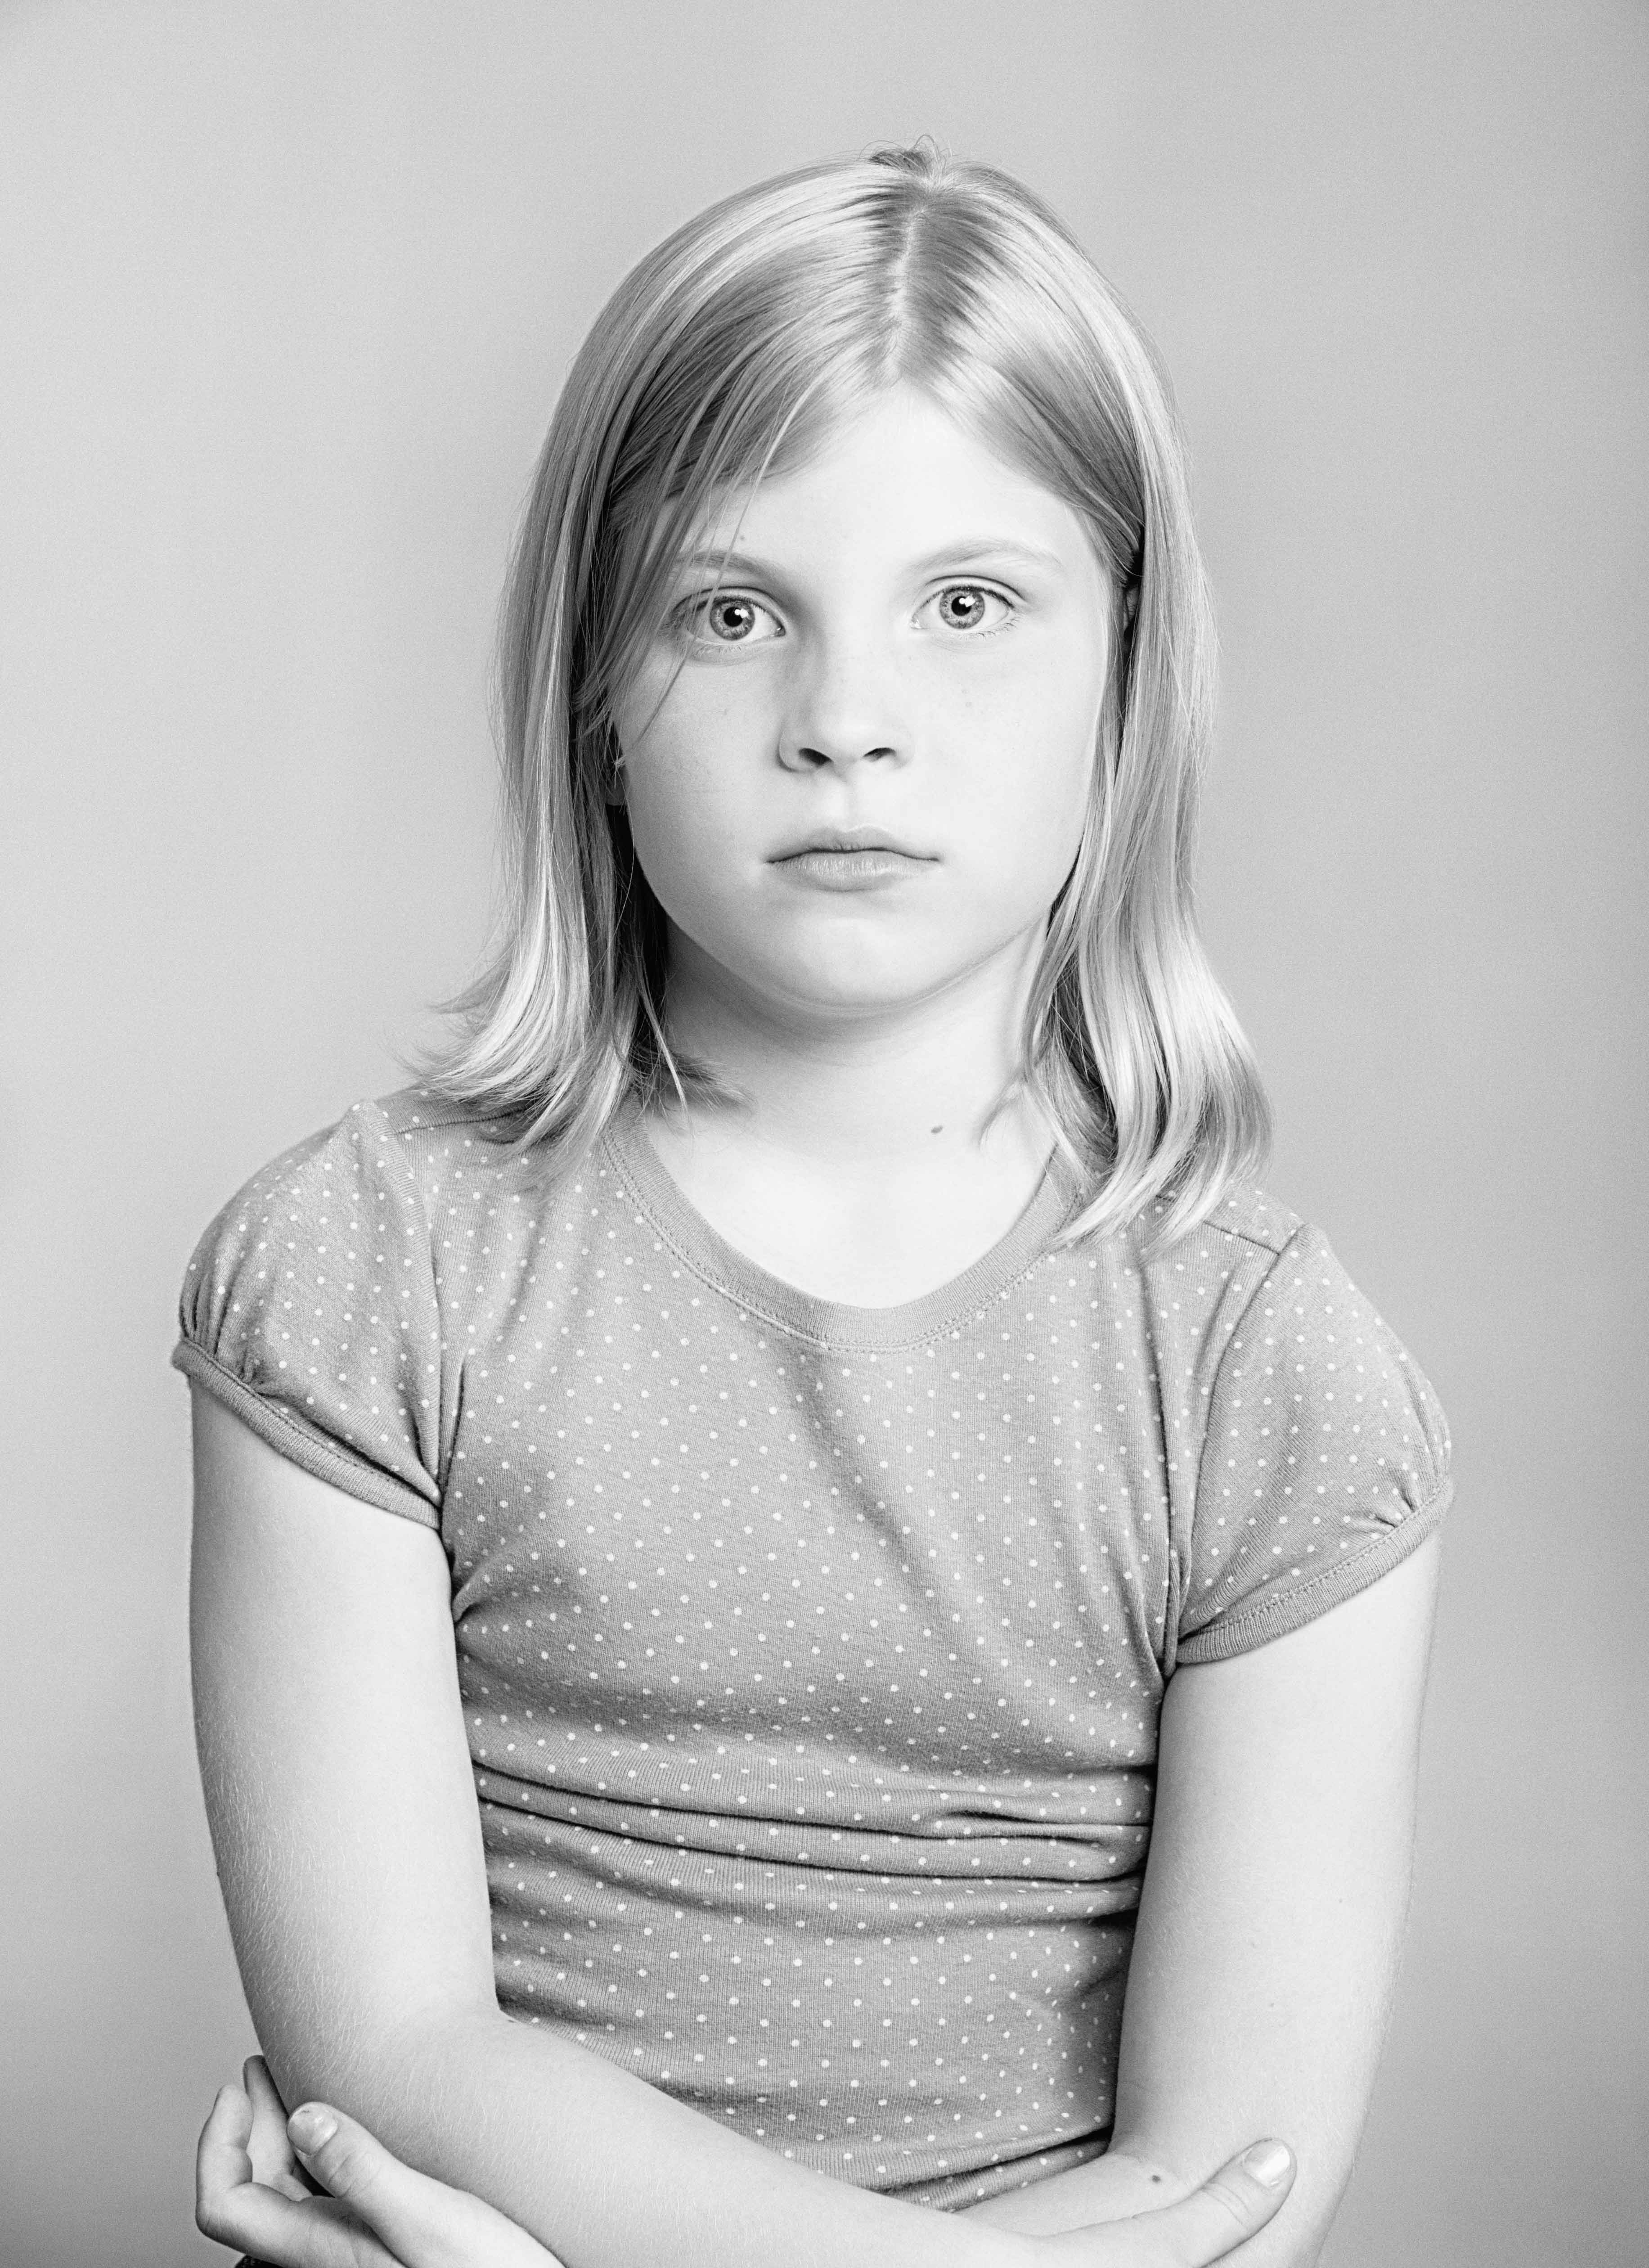  close up photography portrait of a young girl in black and white on a white background for Wyoming Department of Social Services